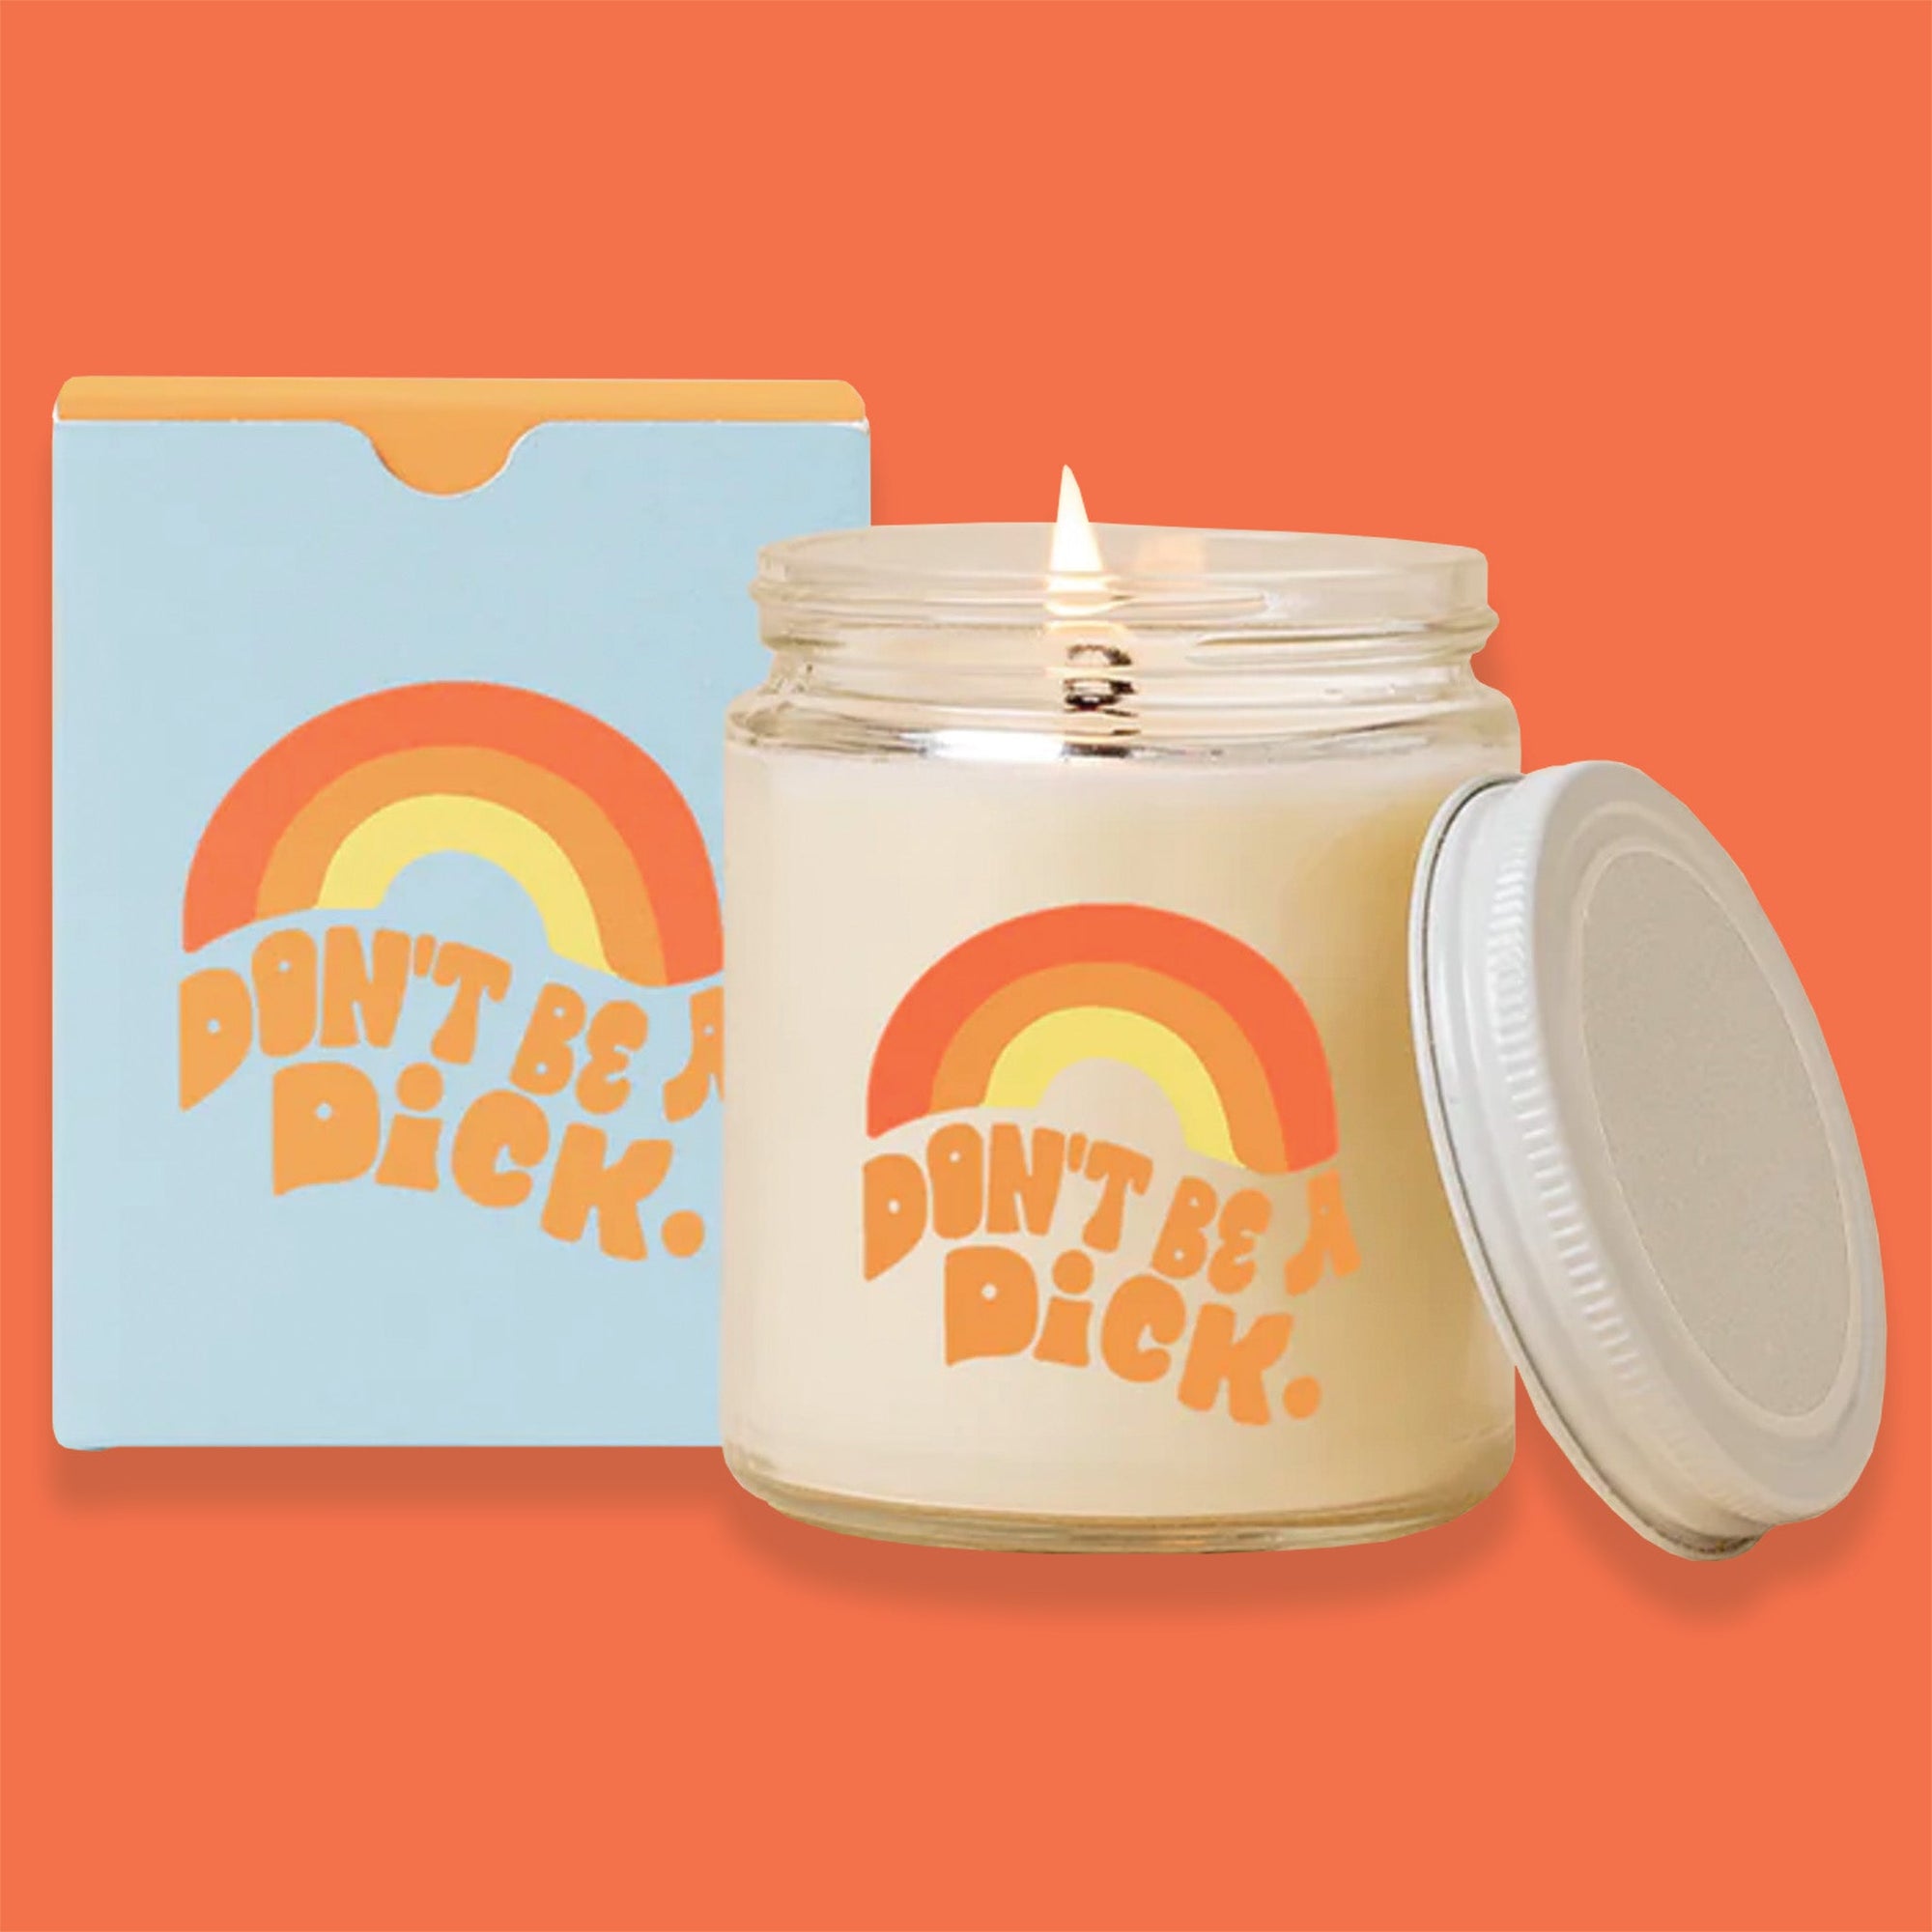 On an orangey-red background sits a box and a candle. The box is a package for the candle. It is light blue with a rainbow graphic on the front in orange, mustard orange and yellow. Under it says "DON'T BE A DiCK." in a groovy, orange handwritten font. Next to it is a glass candle that is lit, with the same rainbow graphic and saying and there is a white lid leaning against it. 